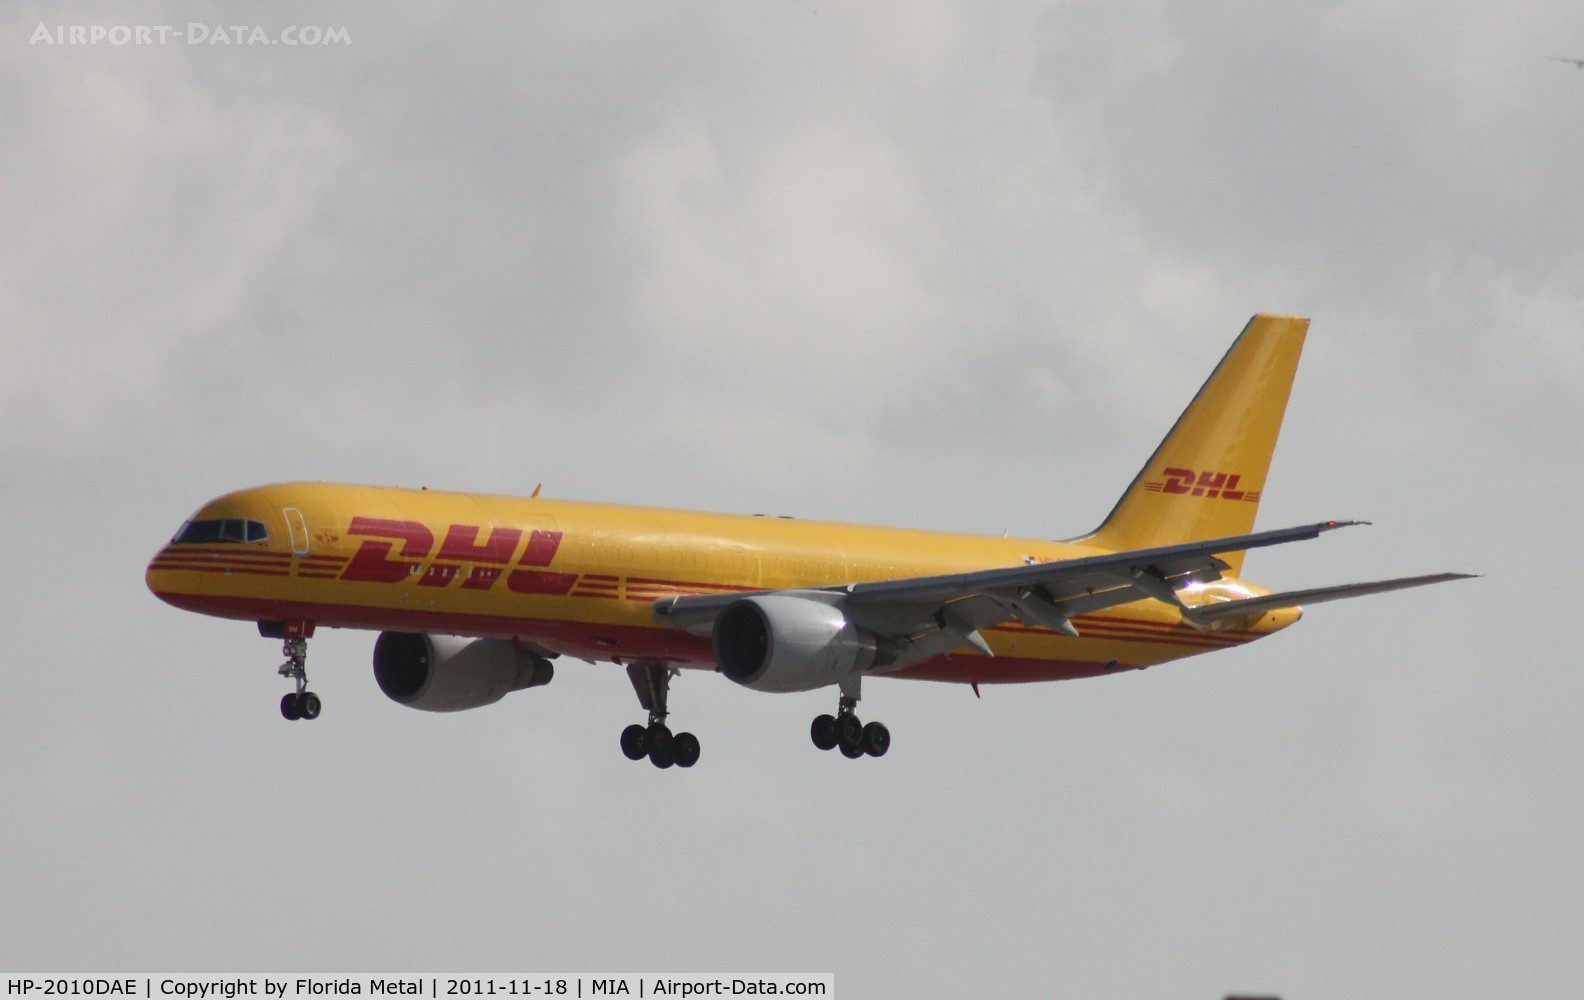 HP-2010DAE, 1999 Boeing 757-27A C/N 29610, DHL Aero Expreso 757 landing on Runway 30, one of many windshifts that morning